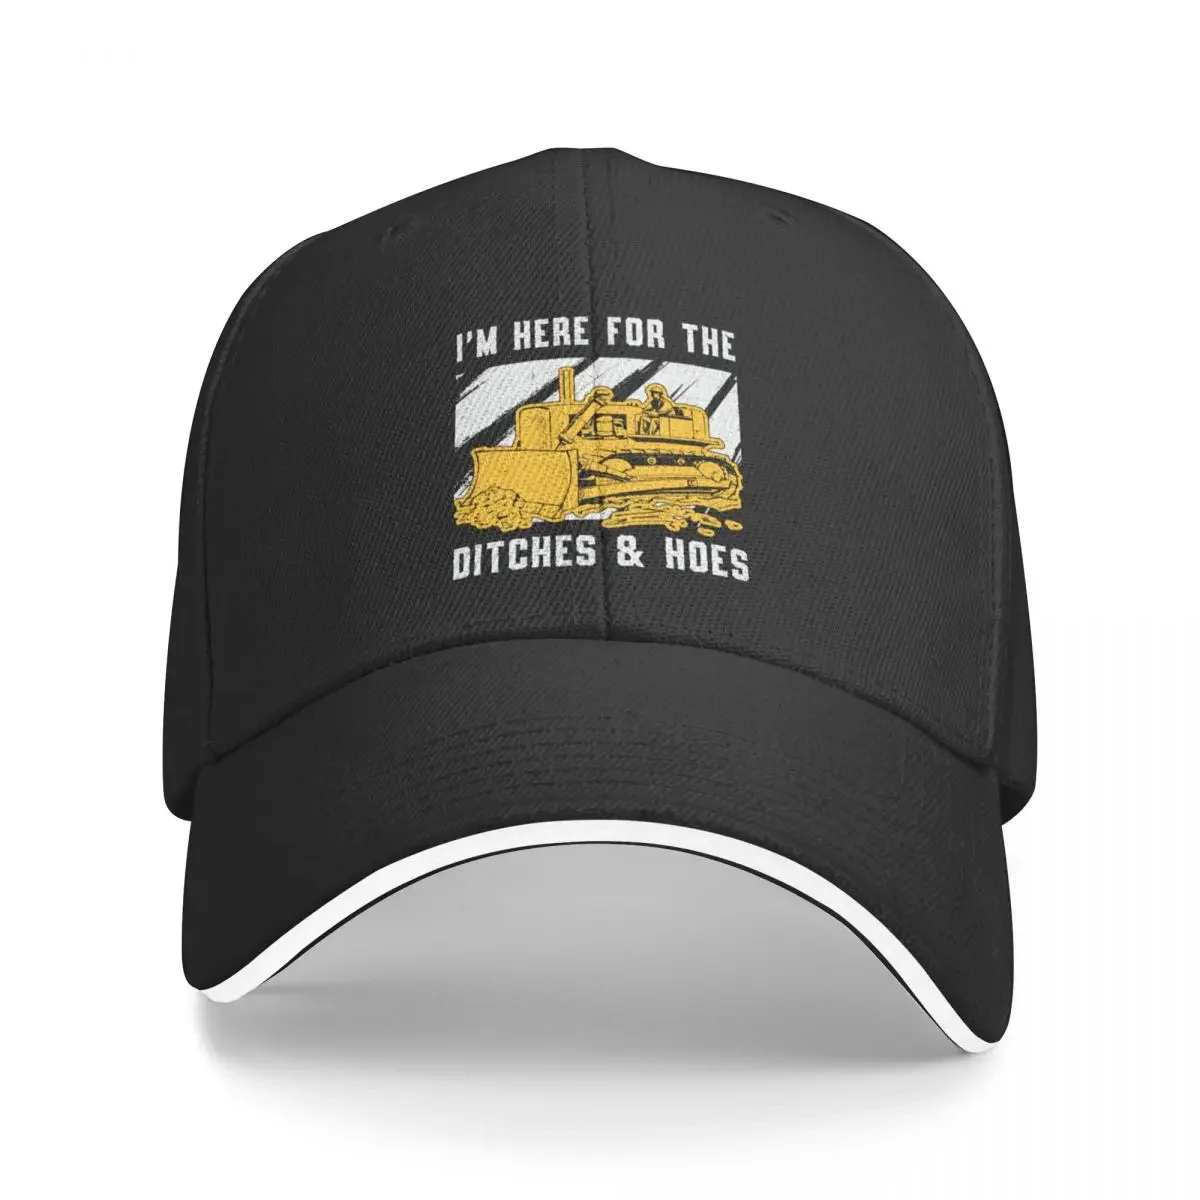 Bulldozer I'm Here For The Ditches Construction Baseball Cap beach hat Golf New Hat Male Women's